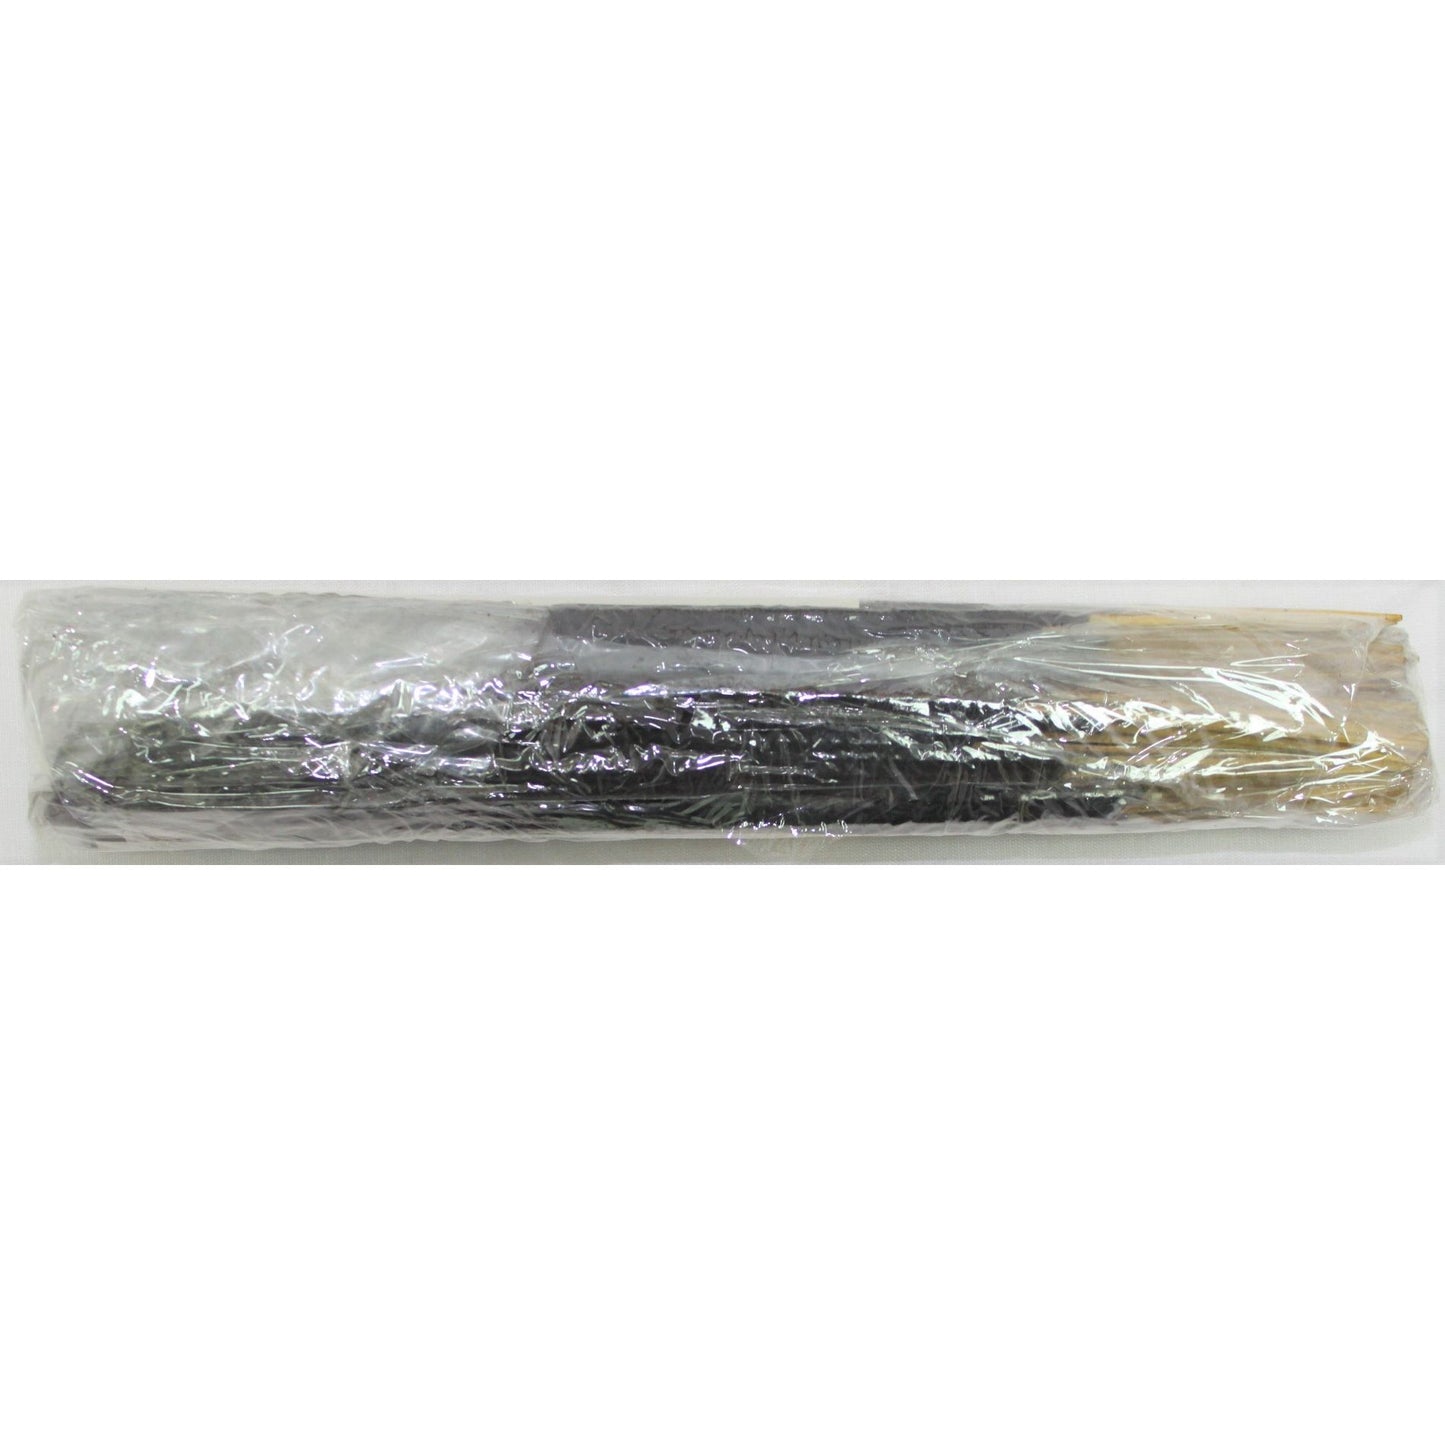 Incense From India - 1000 Dreams